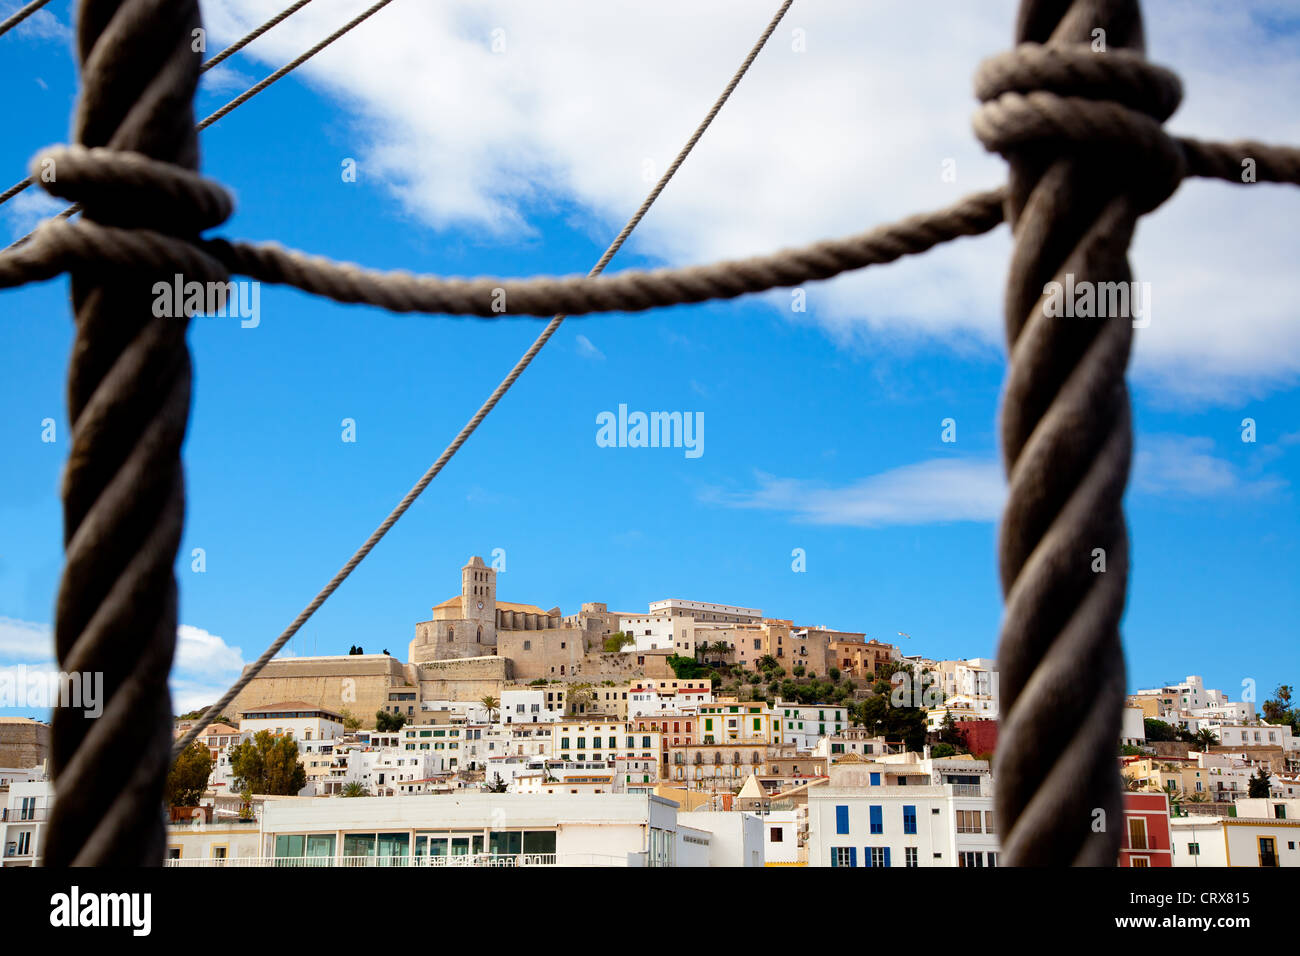 Eivissa Ibiza town with view prom boat rope ladder summer blue sky Stock Photo